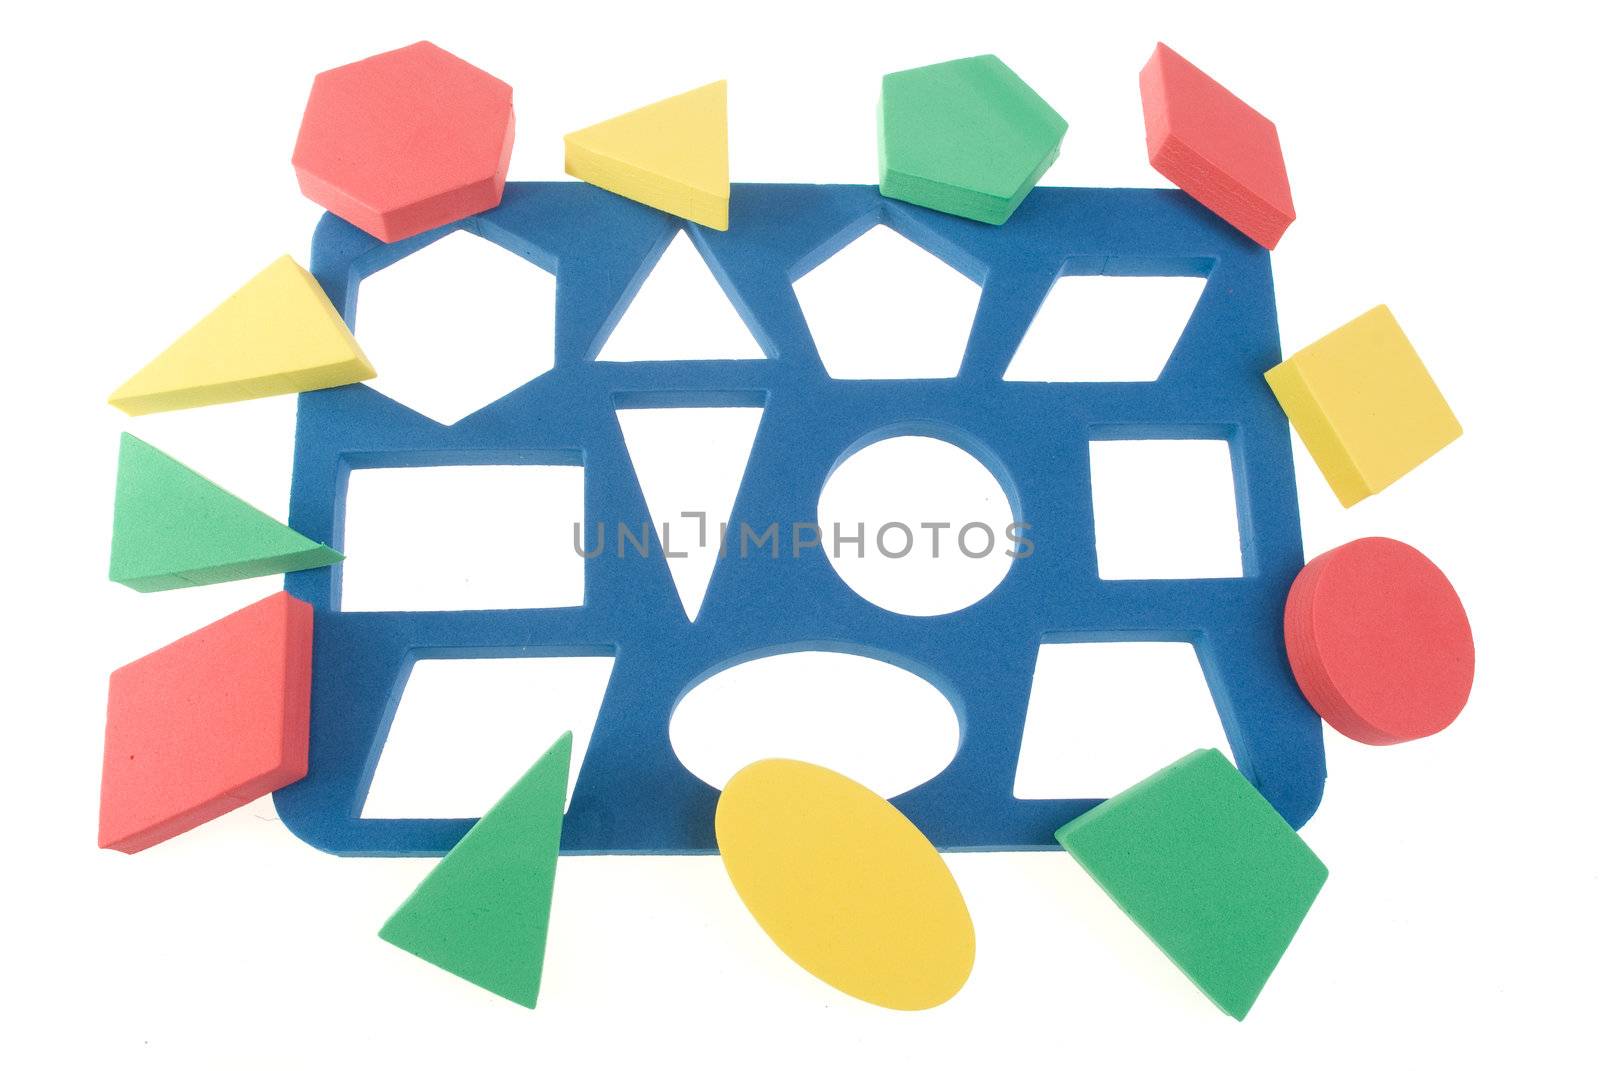 Children's game with color geometric shapes by BIG_TAU